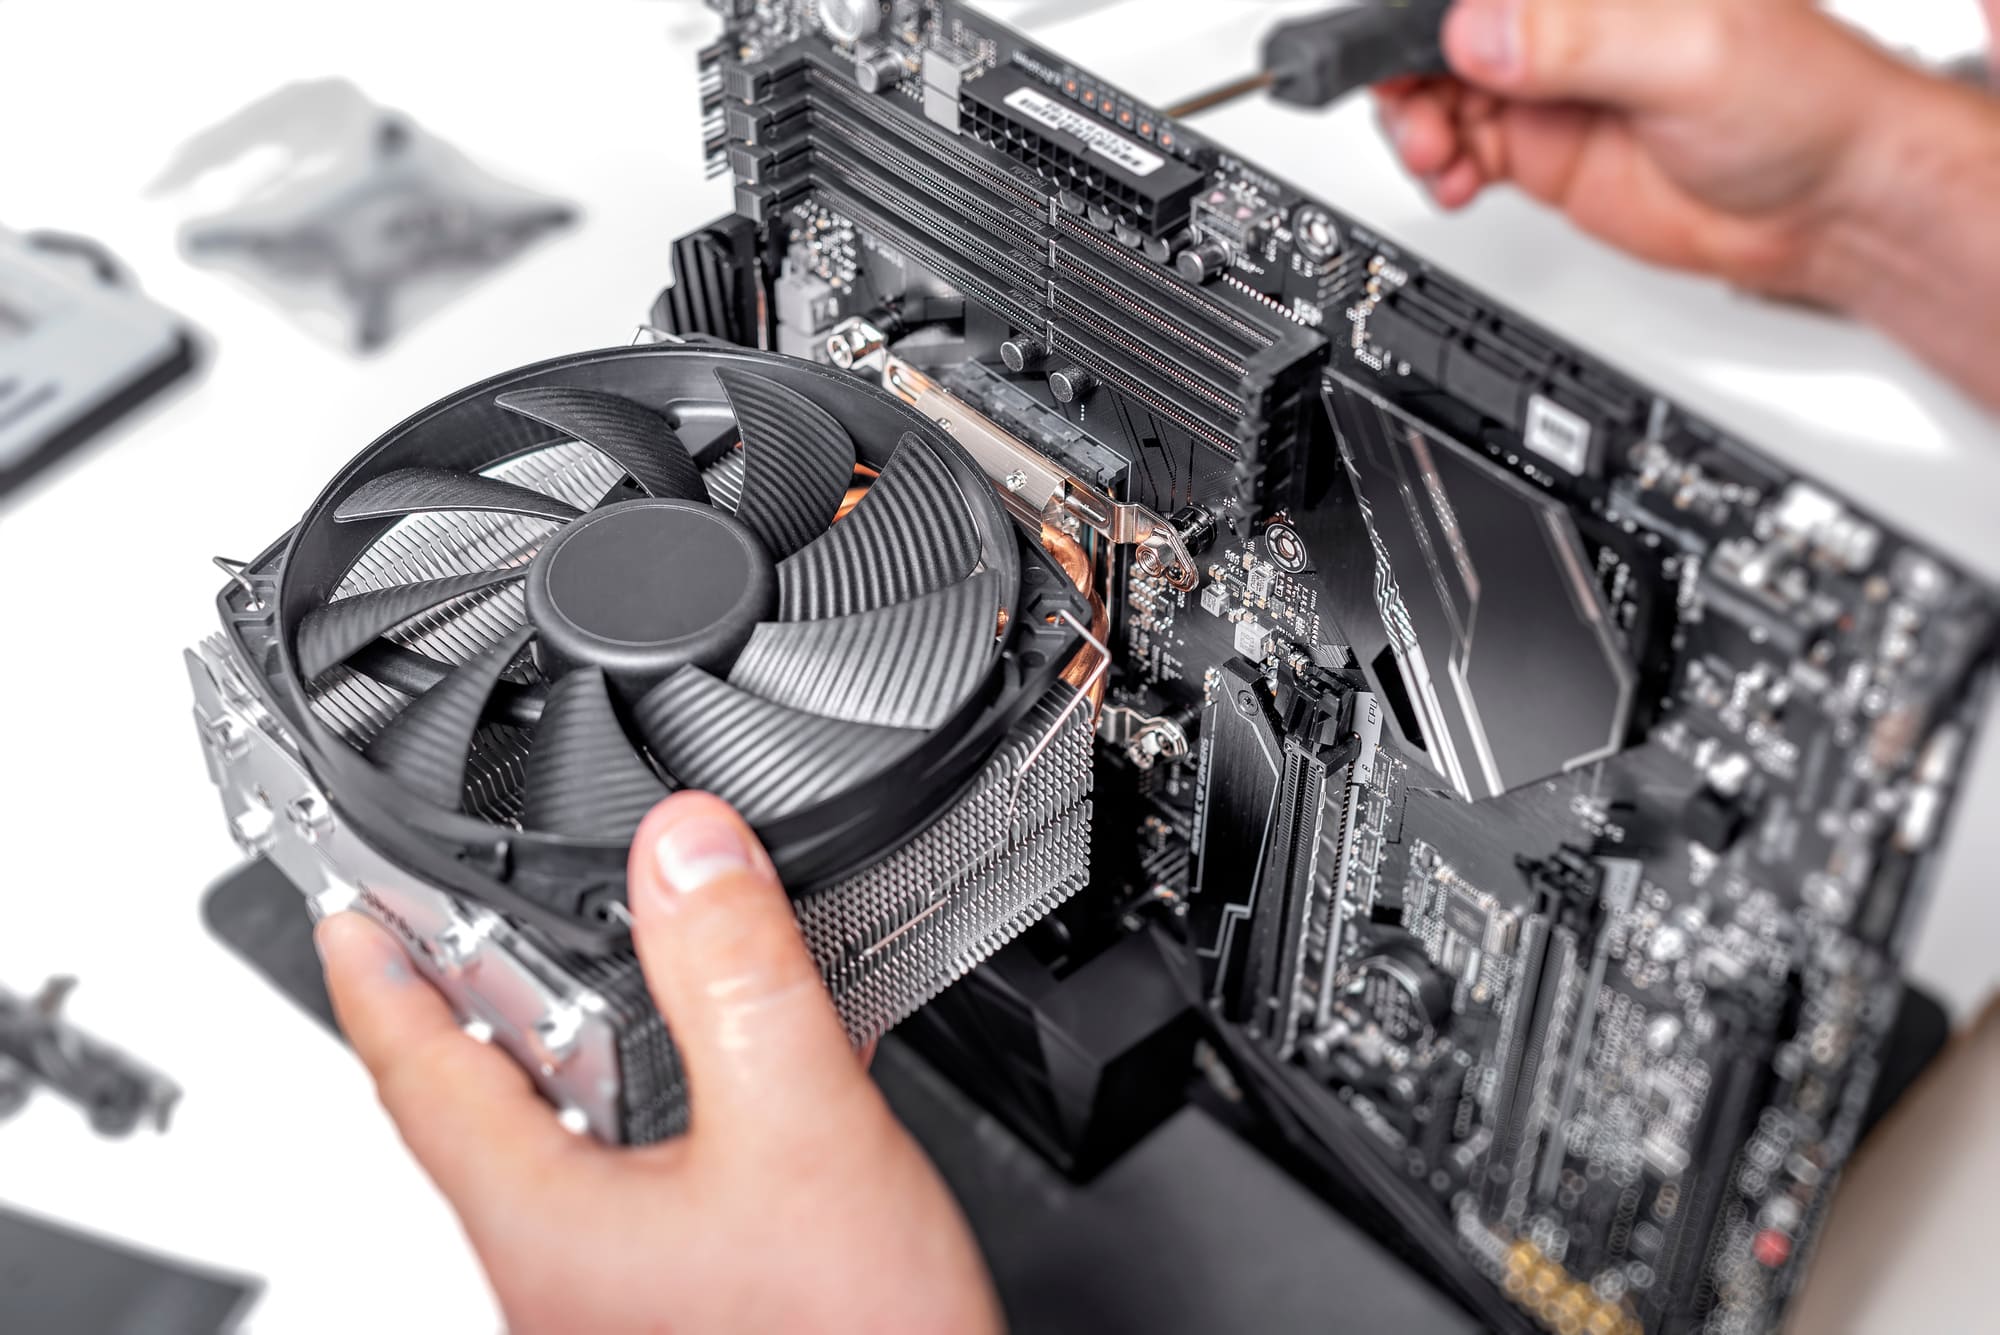 What Should You Look For When Choosing A Computer Repair Service?